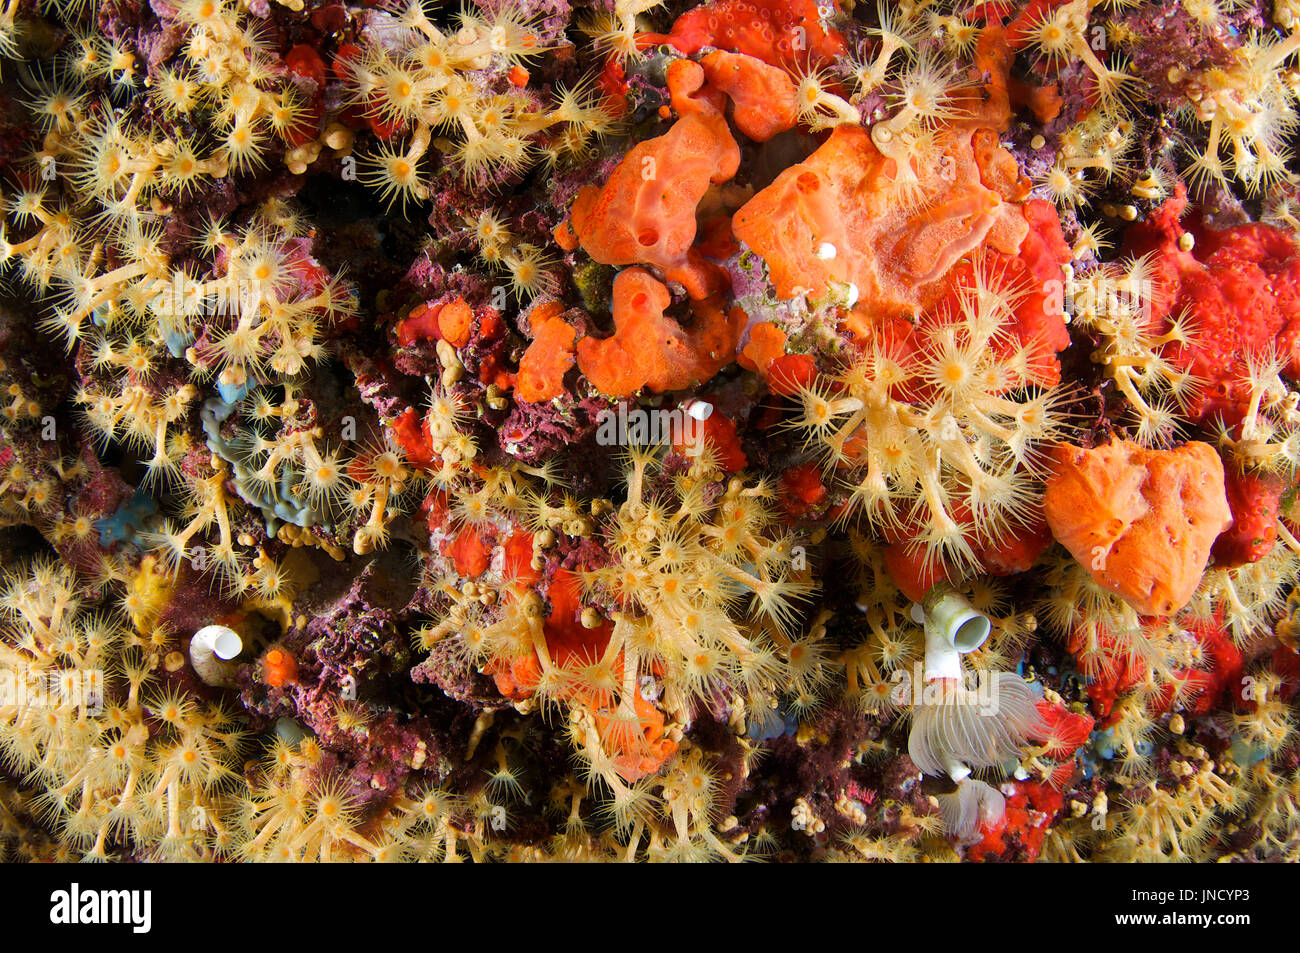 Yellow cluster anemone (Parazoanthus axinellae) colony mixed with oyster sponge (Crambre crambe) in Ses Salines Natural Park (Formentera, Spain) Stock Photo